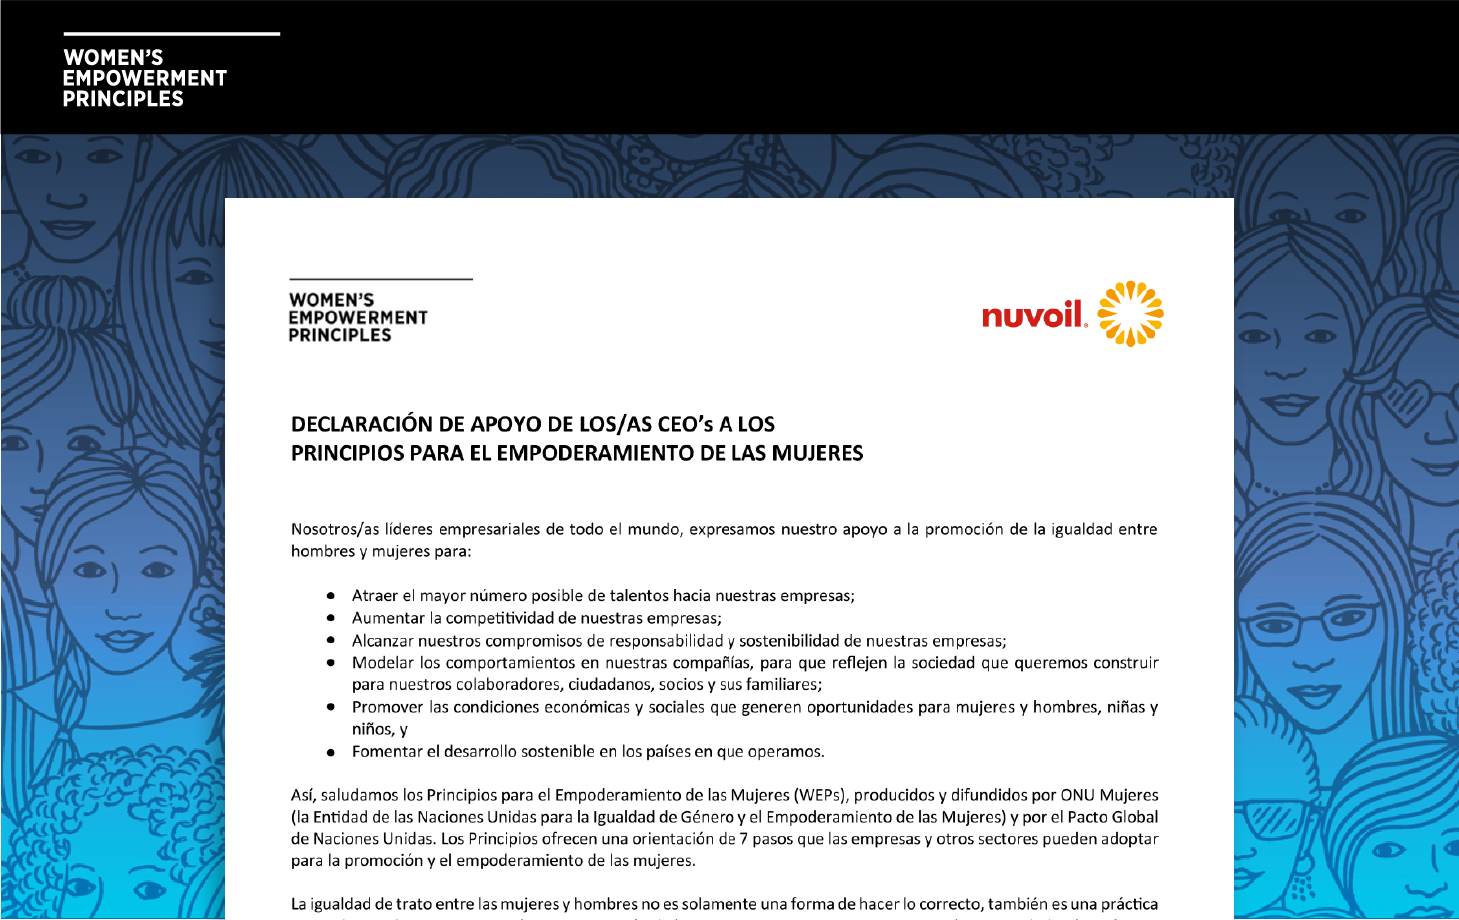 Nuvoil adheres to the United Nations Women's Empowerment Principles